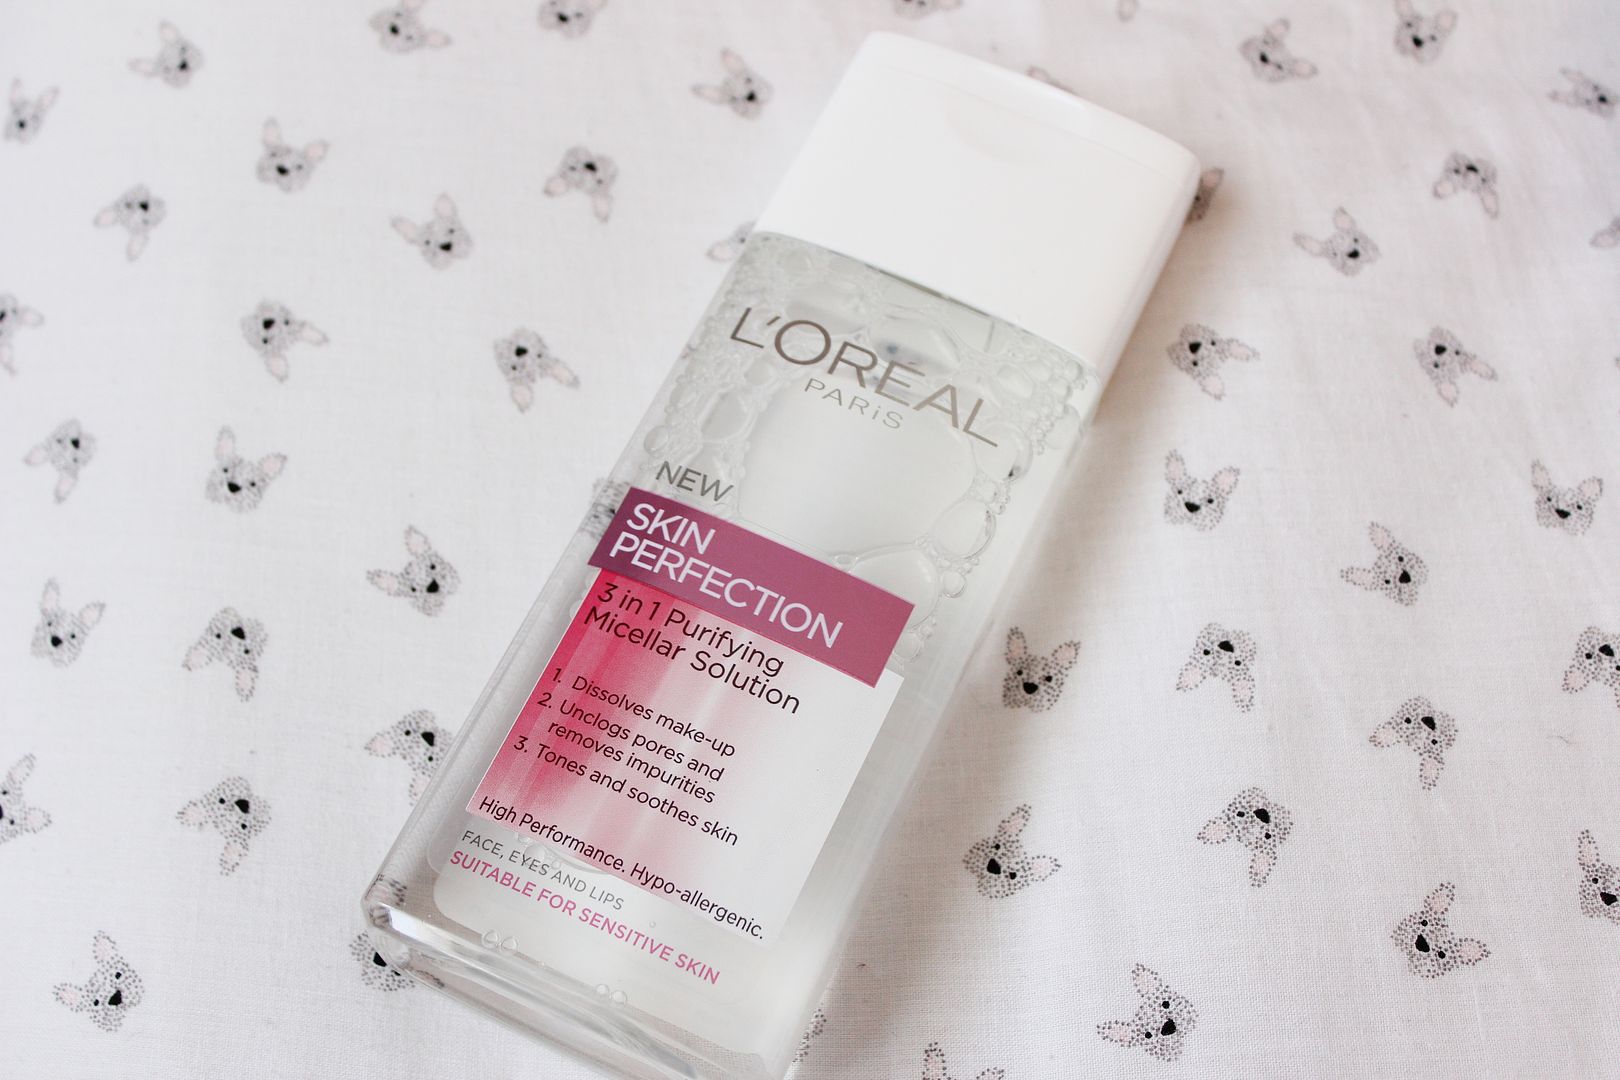 L'Oreal 3 in 1 Purifying Micellar Solution